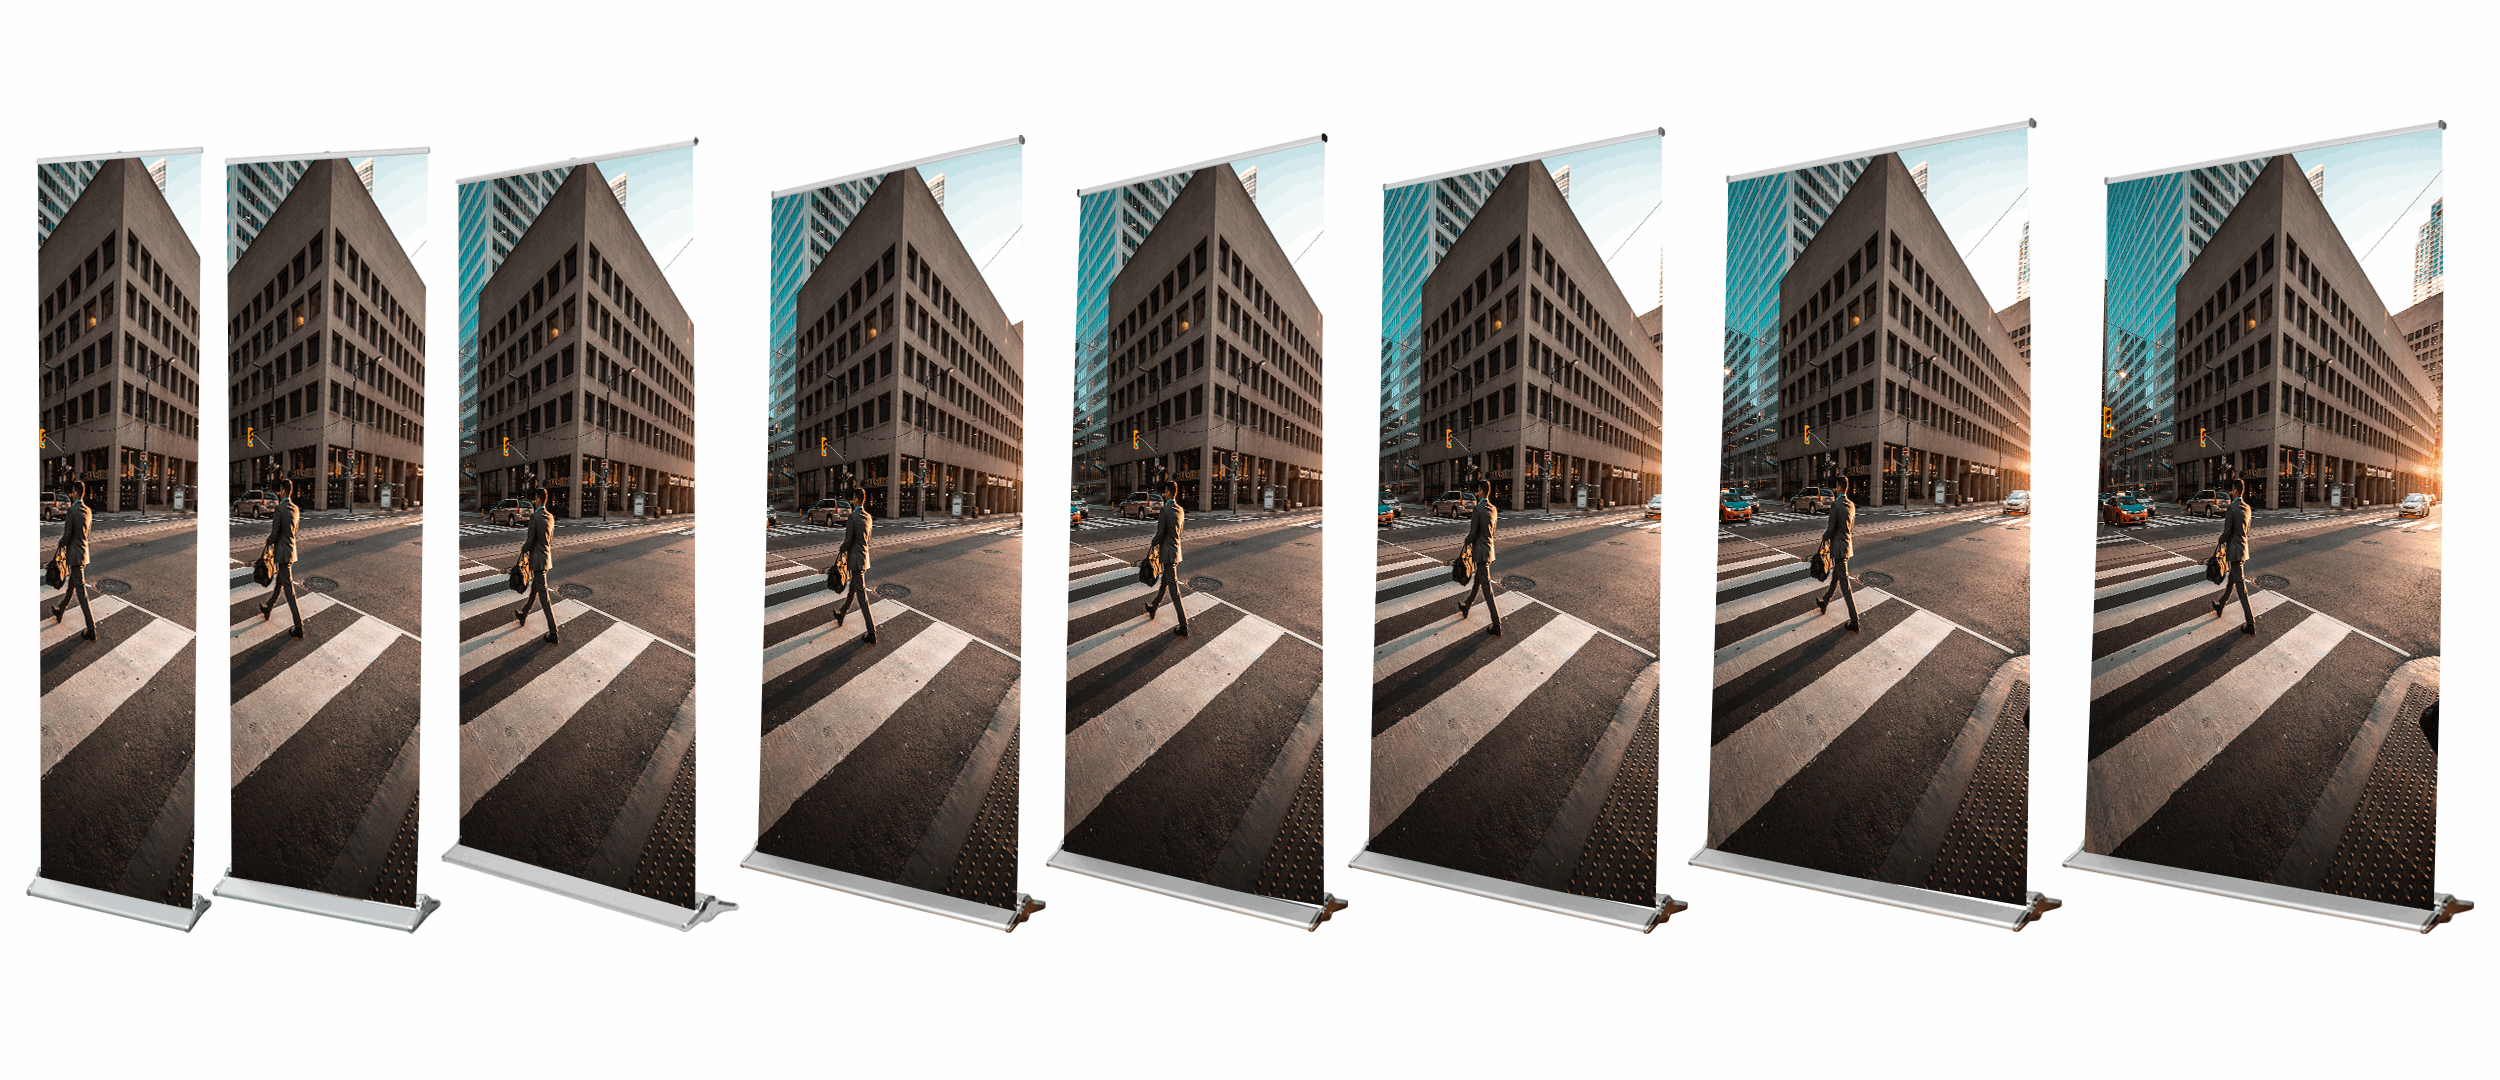 An image showcasing the various sizes available for retractable banner stands.